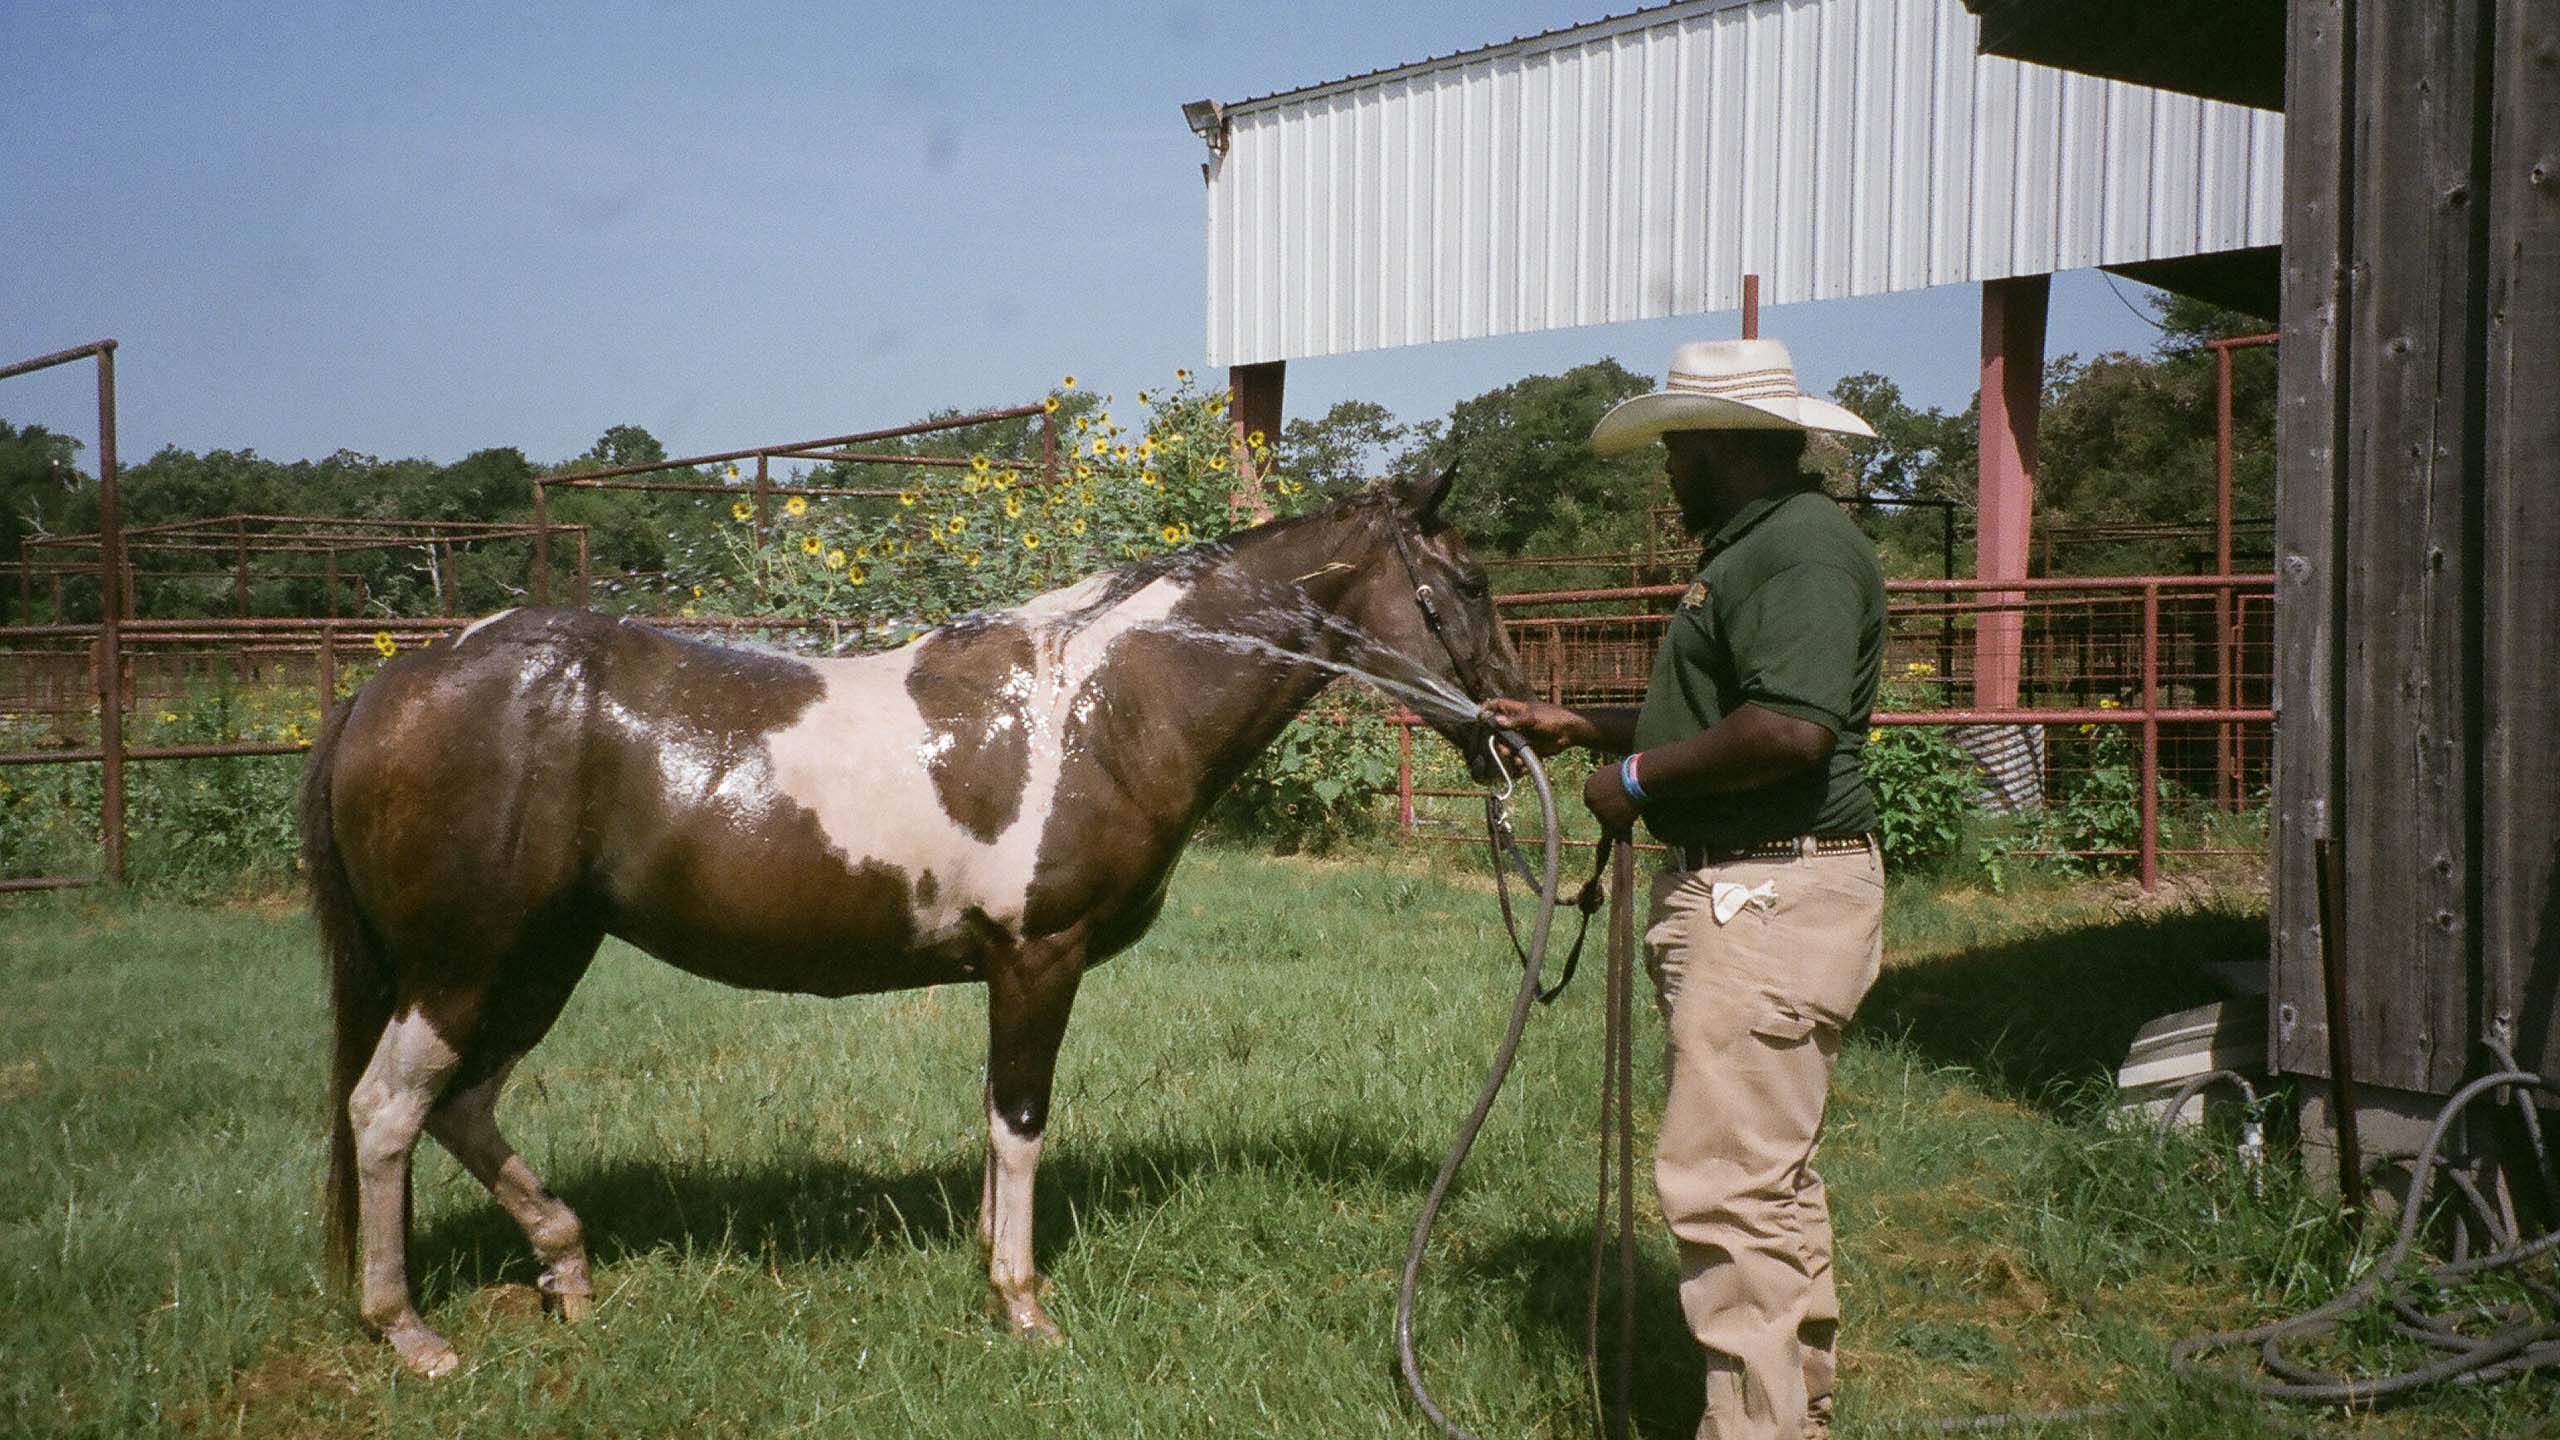 Rancher Jeremy Coleman pictured washing a brown and white horse in the grass. July 2019